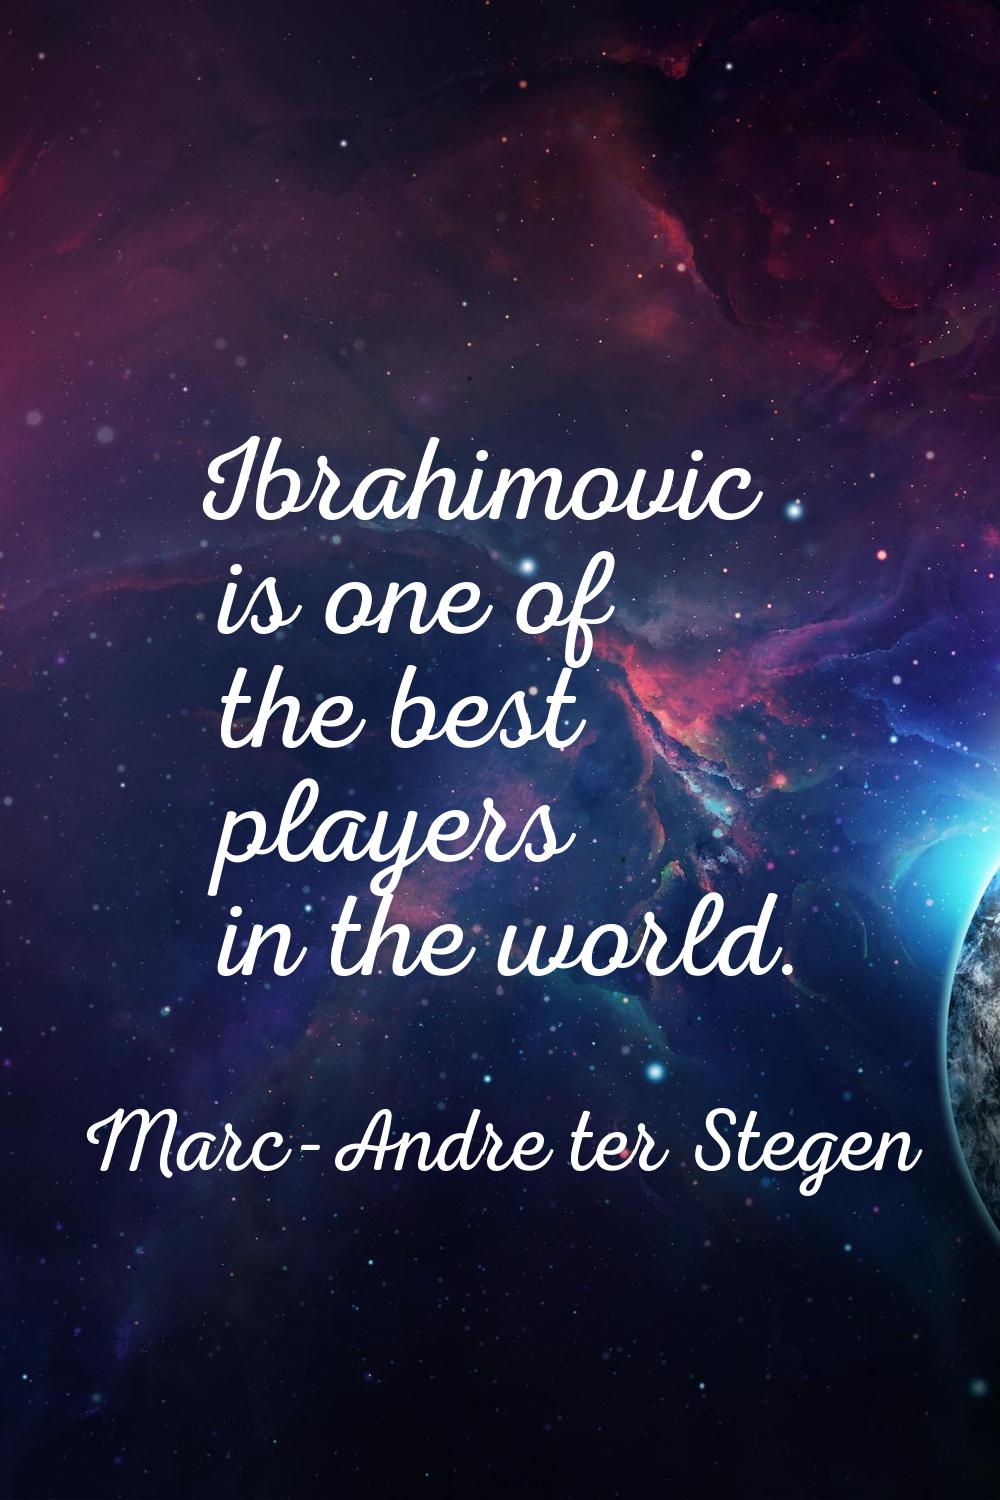 Ibrahimovic is one of the best players in the world.